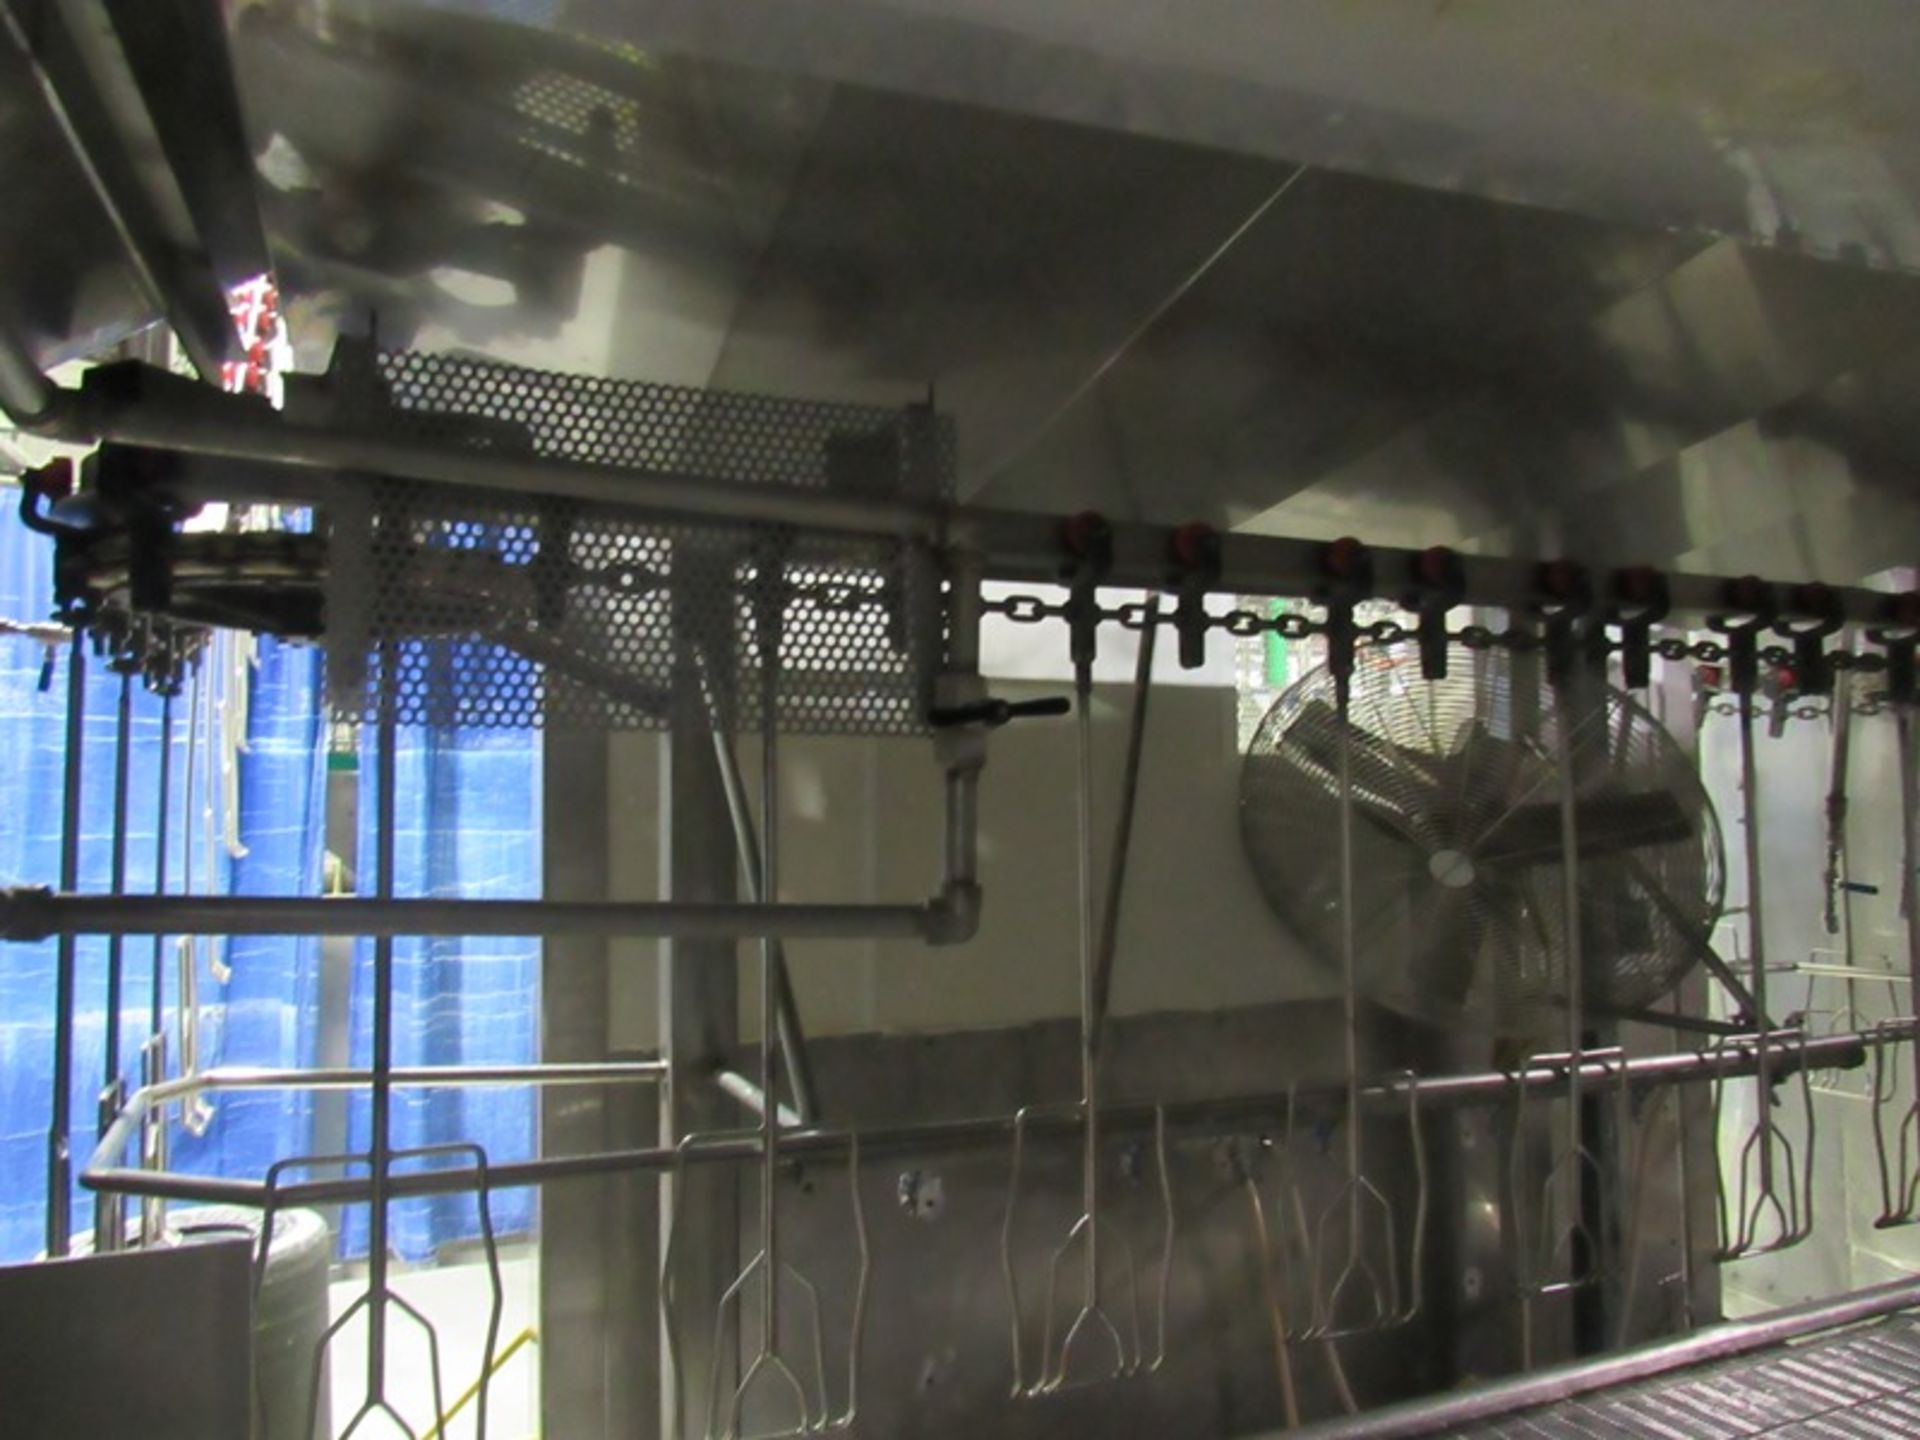 Lot Rail, Hangers and Chain approx. 800 stainless steel turkey Hangers on approx. | Rig Fee: $5200 - Image 15 of 15